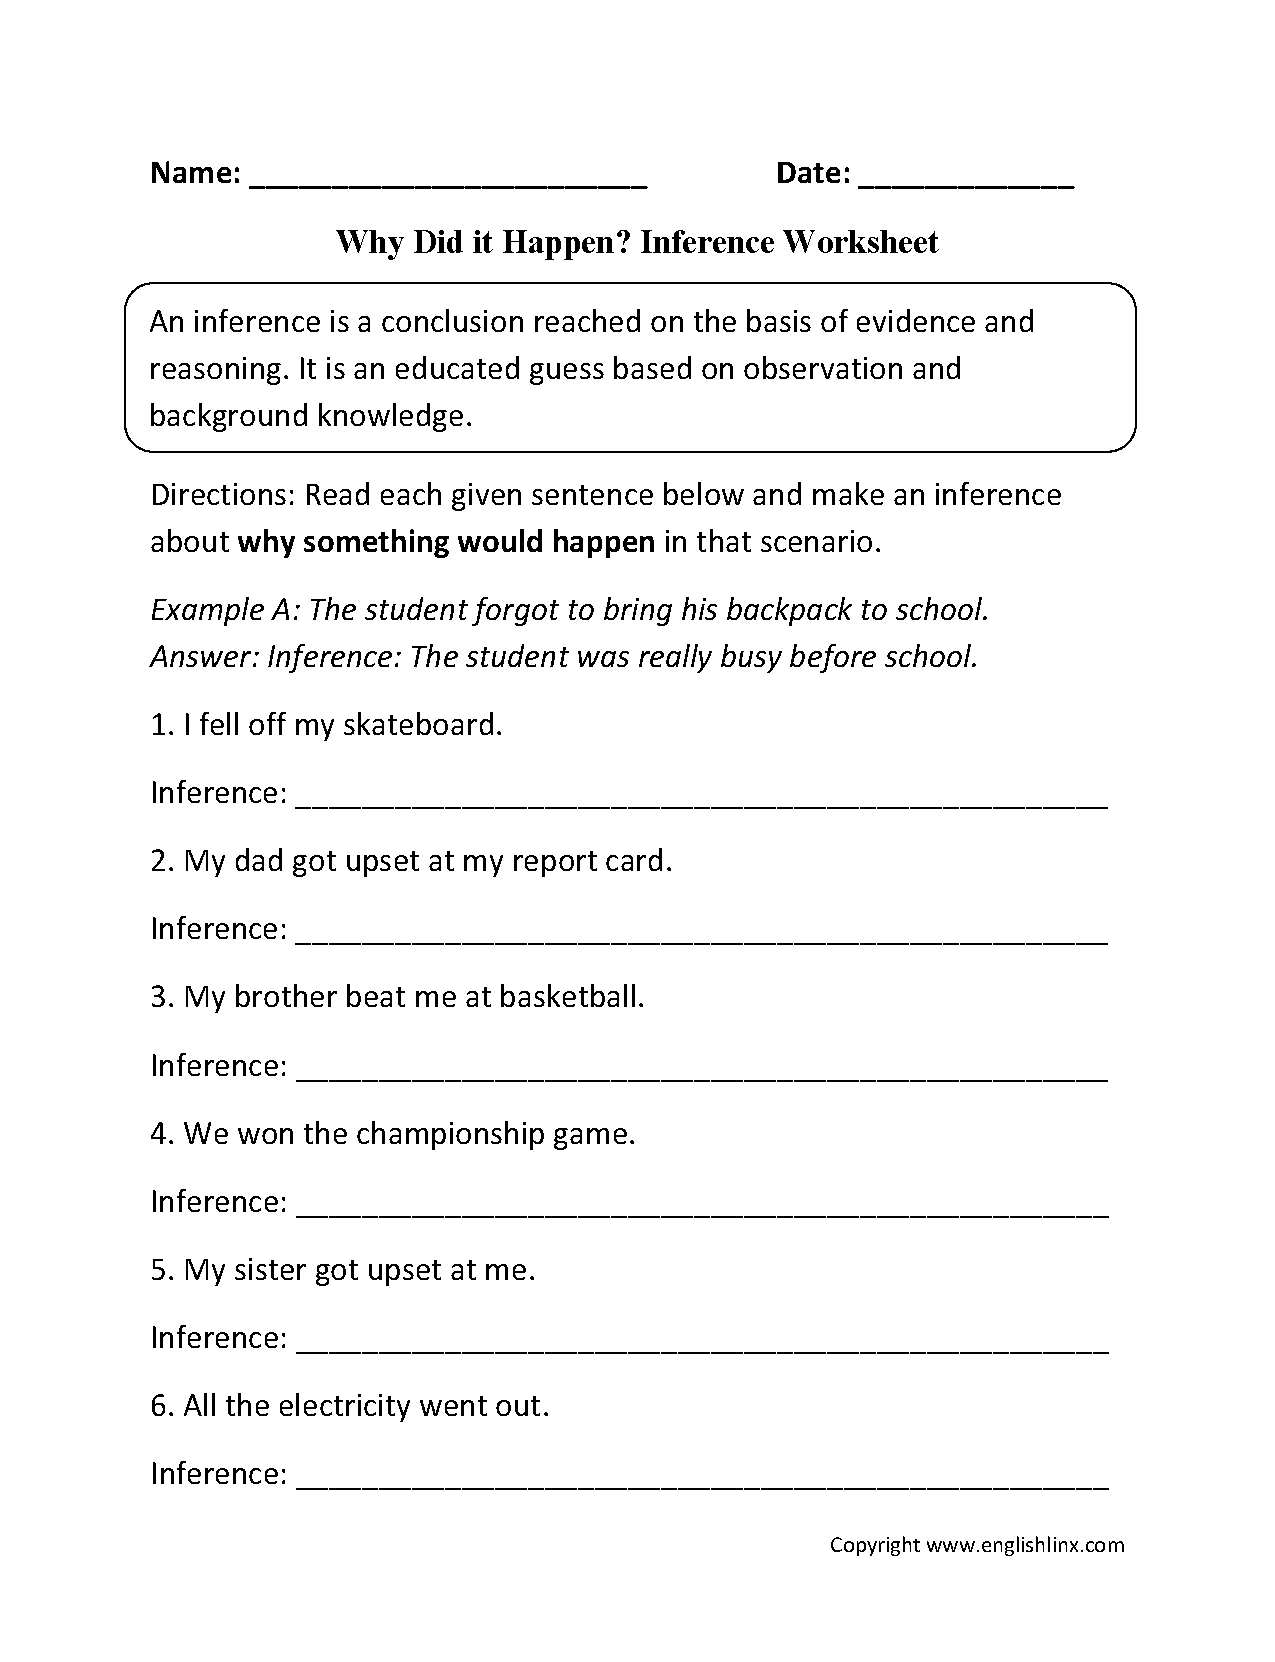 Why Did it Happen? Inference Worksheets